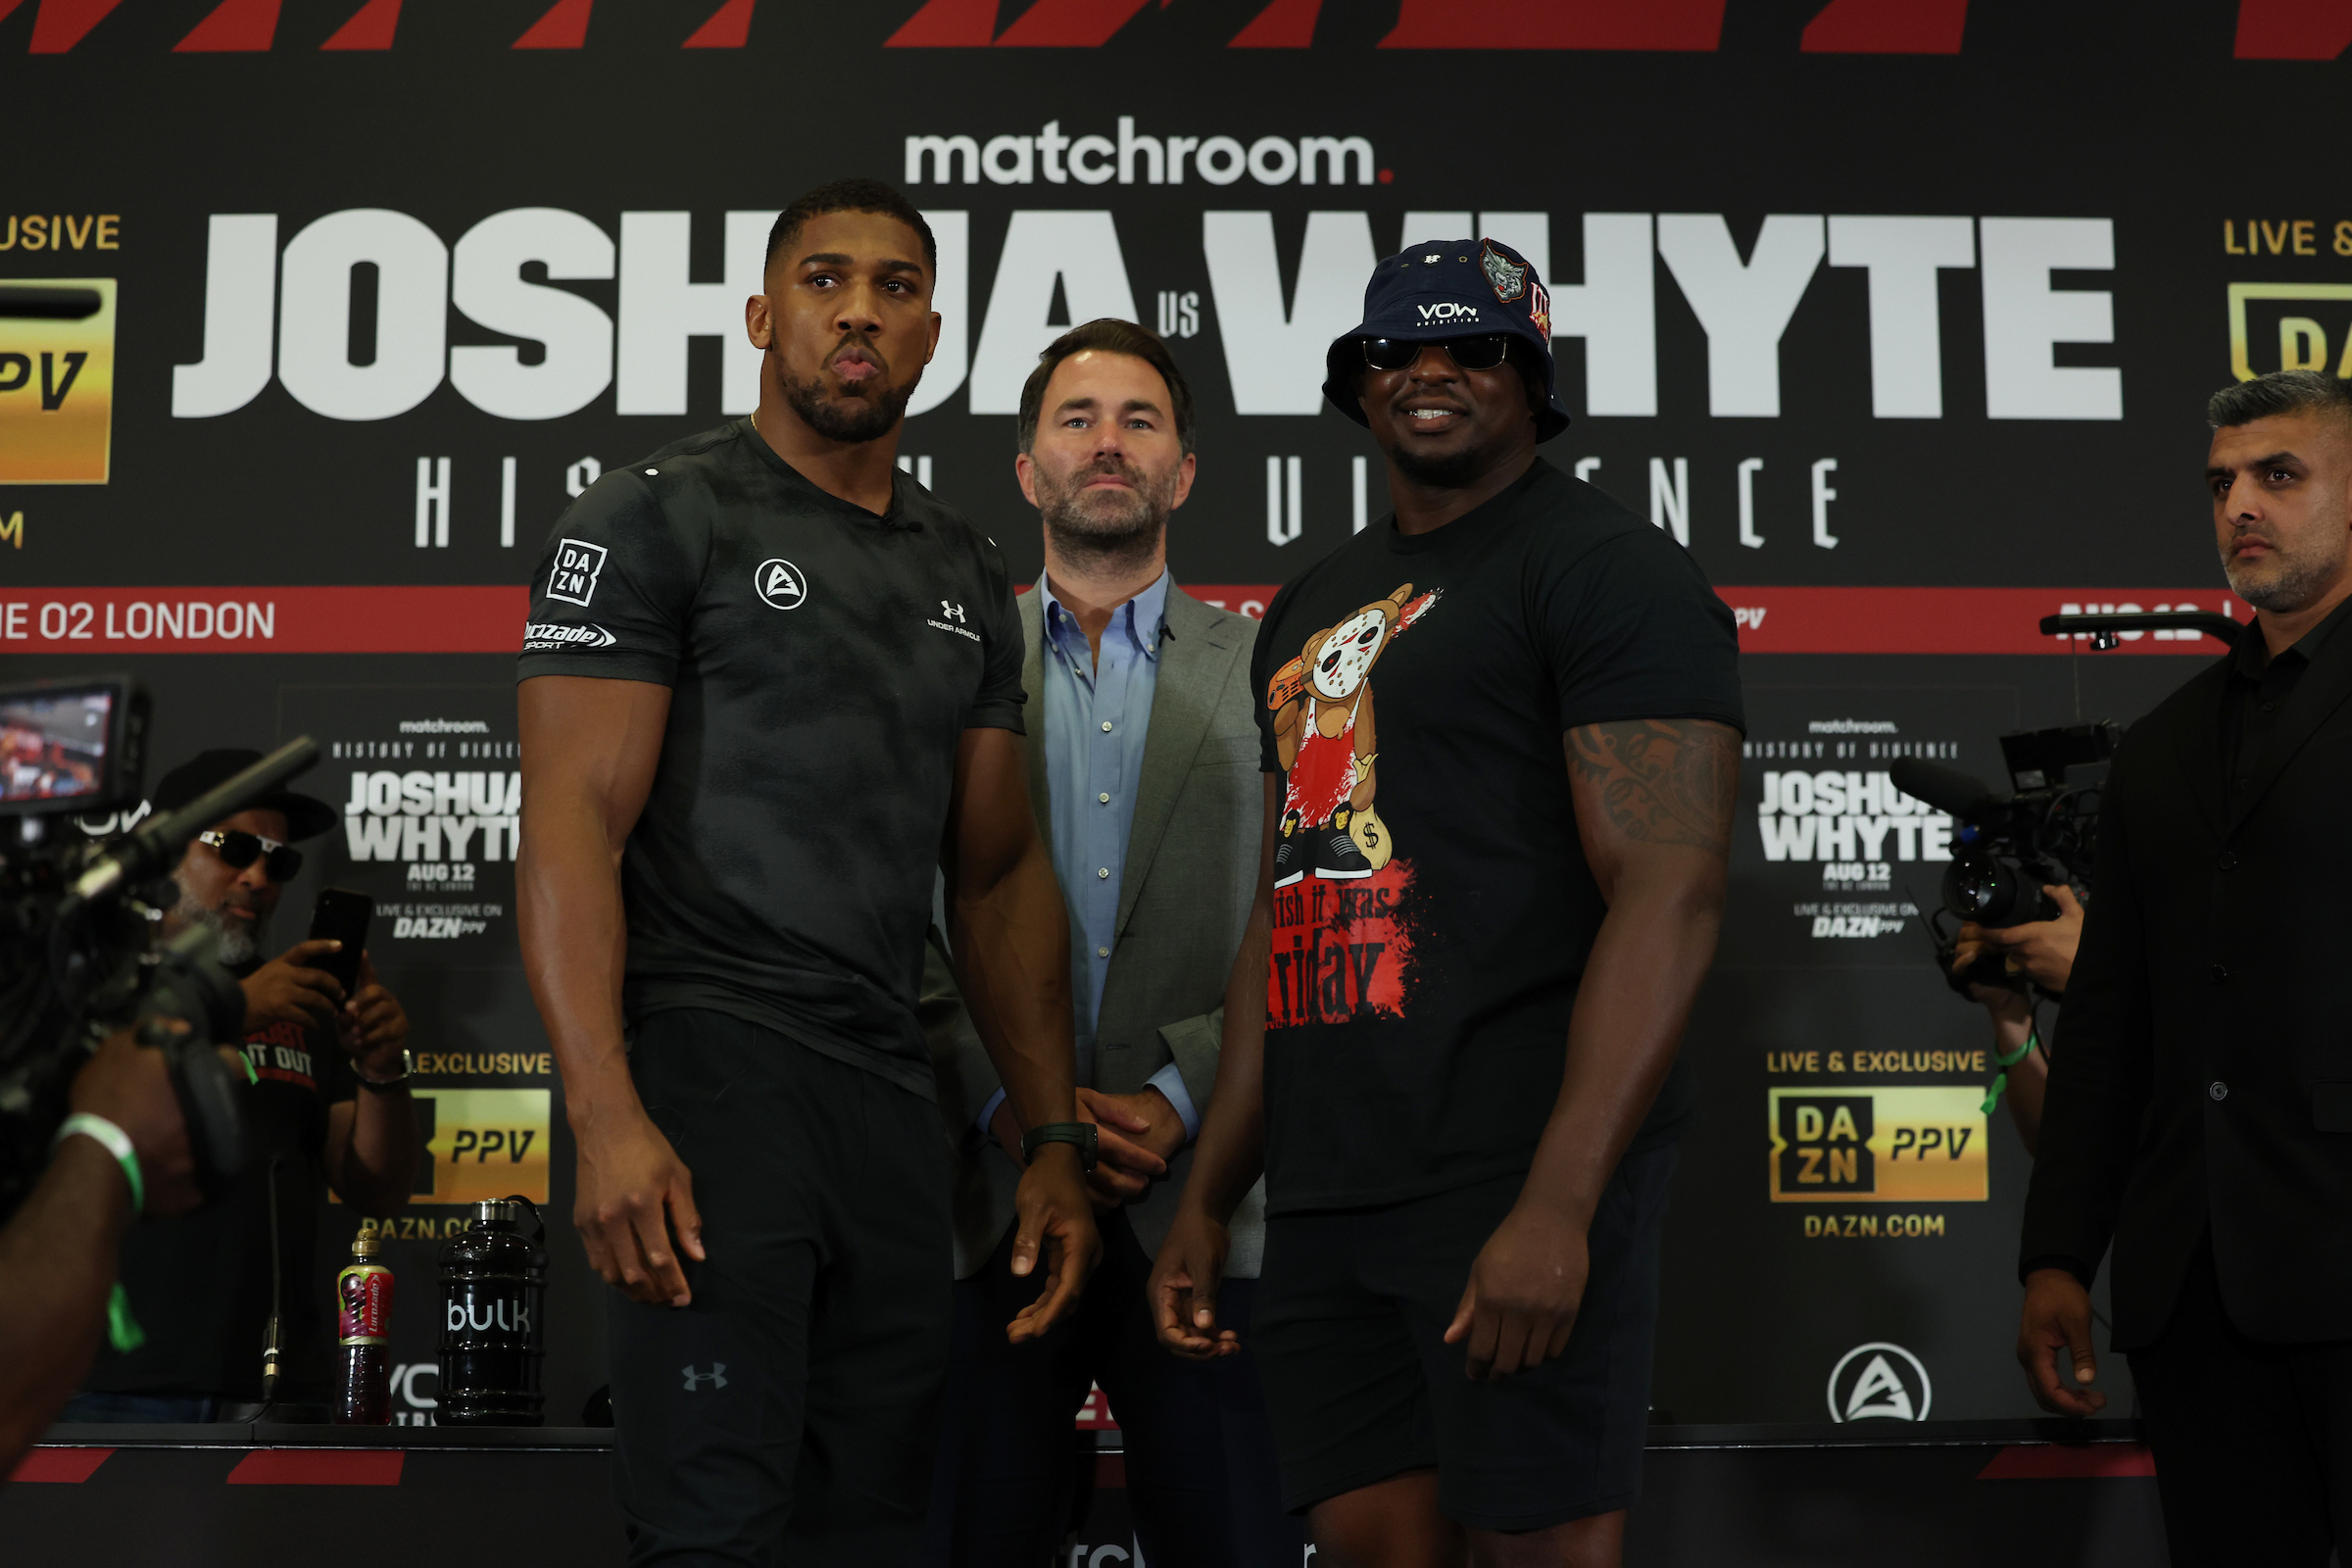 Dillian Whyte positive drug test cancels rematch with Anthony Joshua